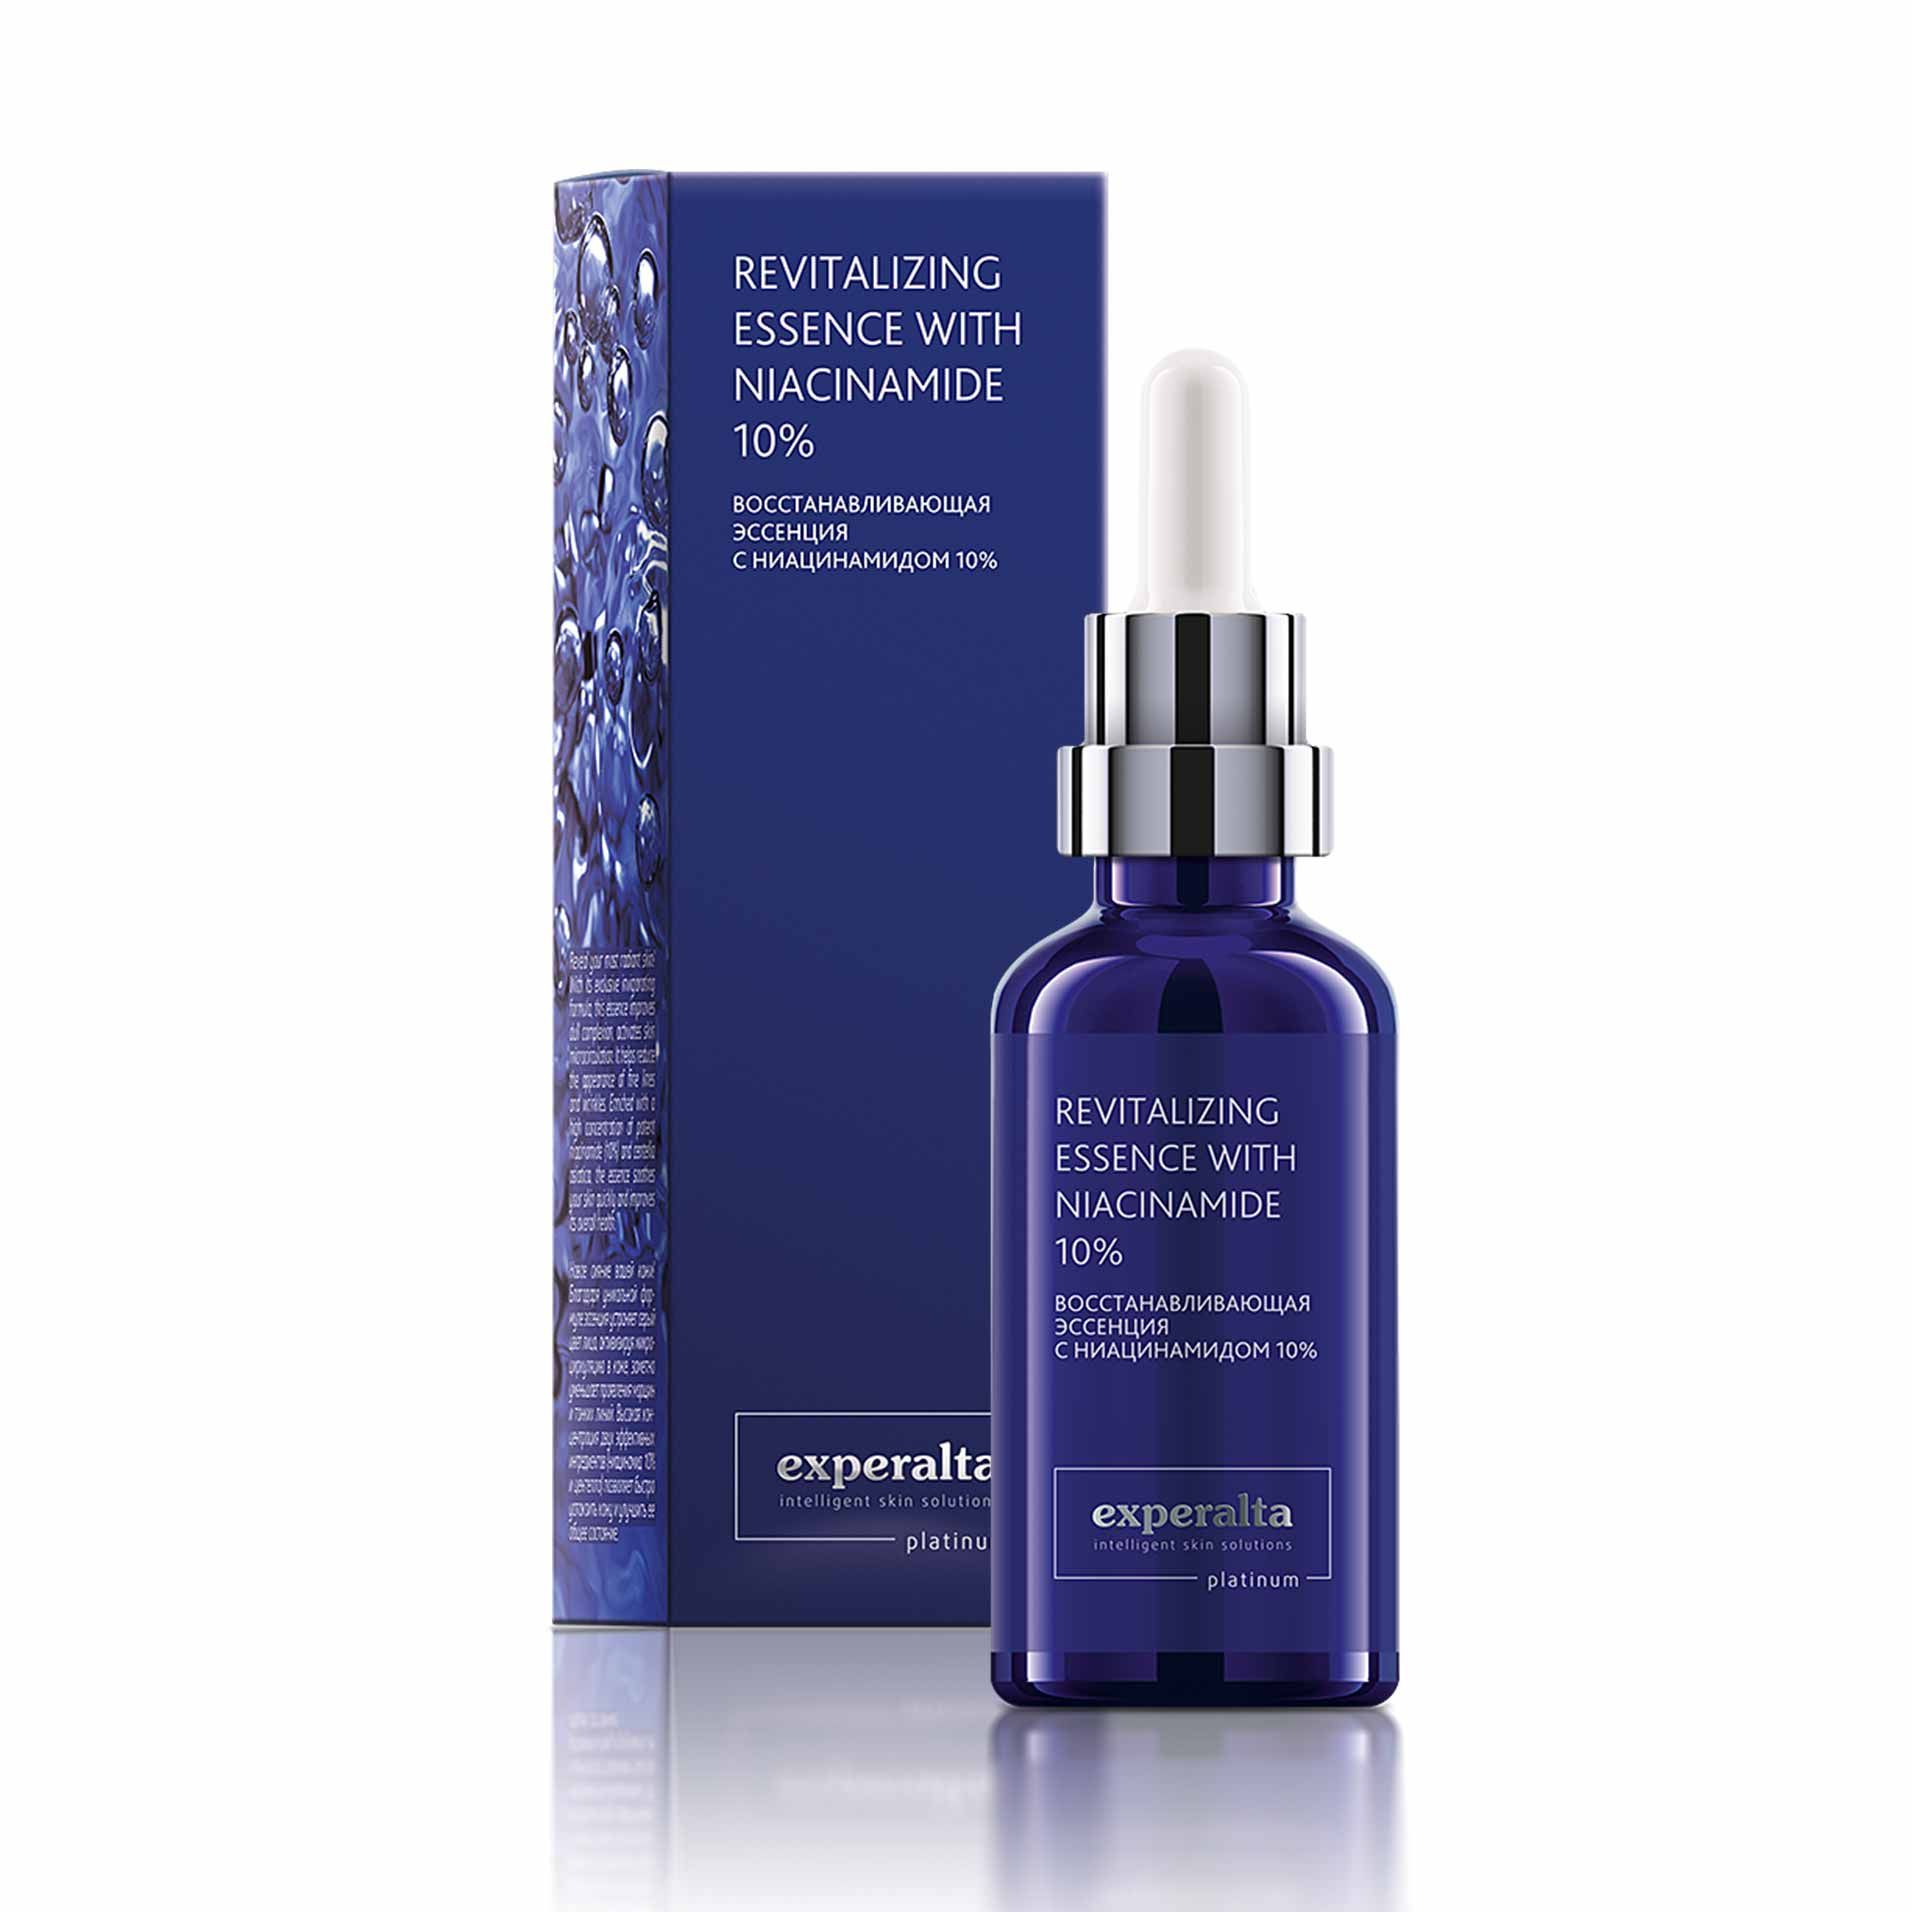 Revitalizing Essence with Niacinamide 10%